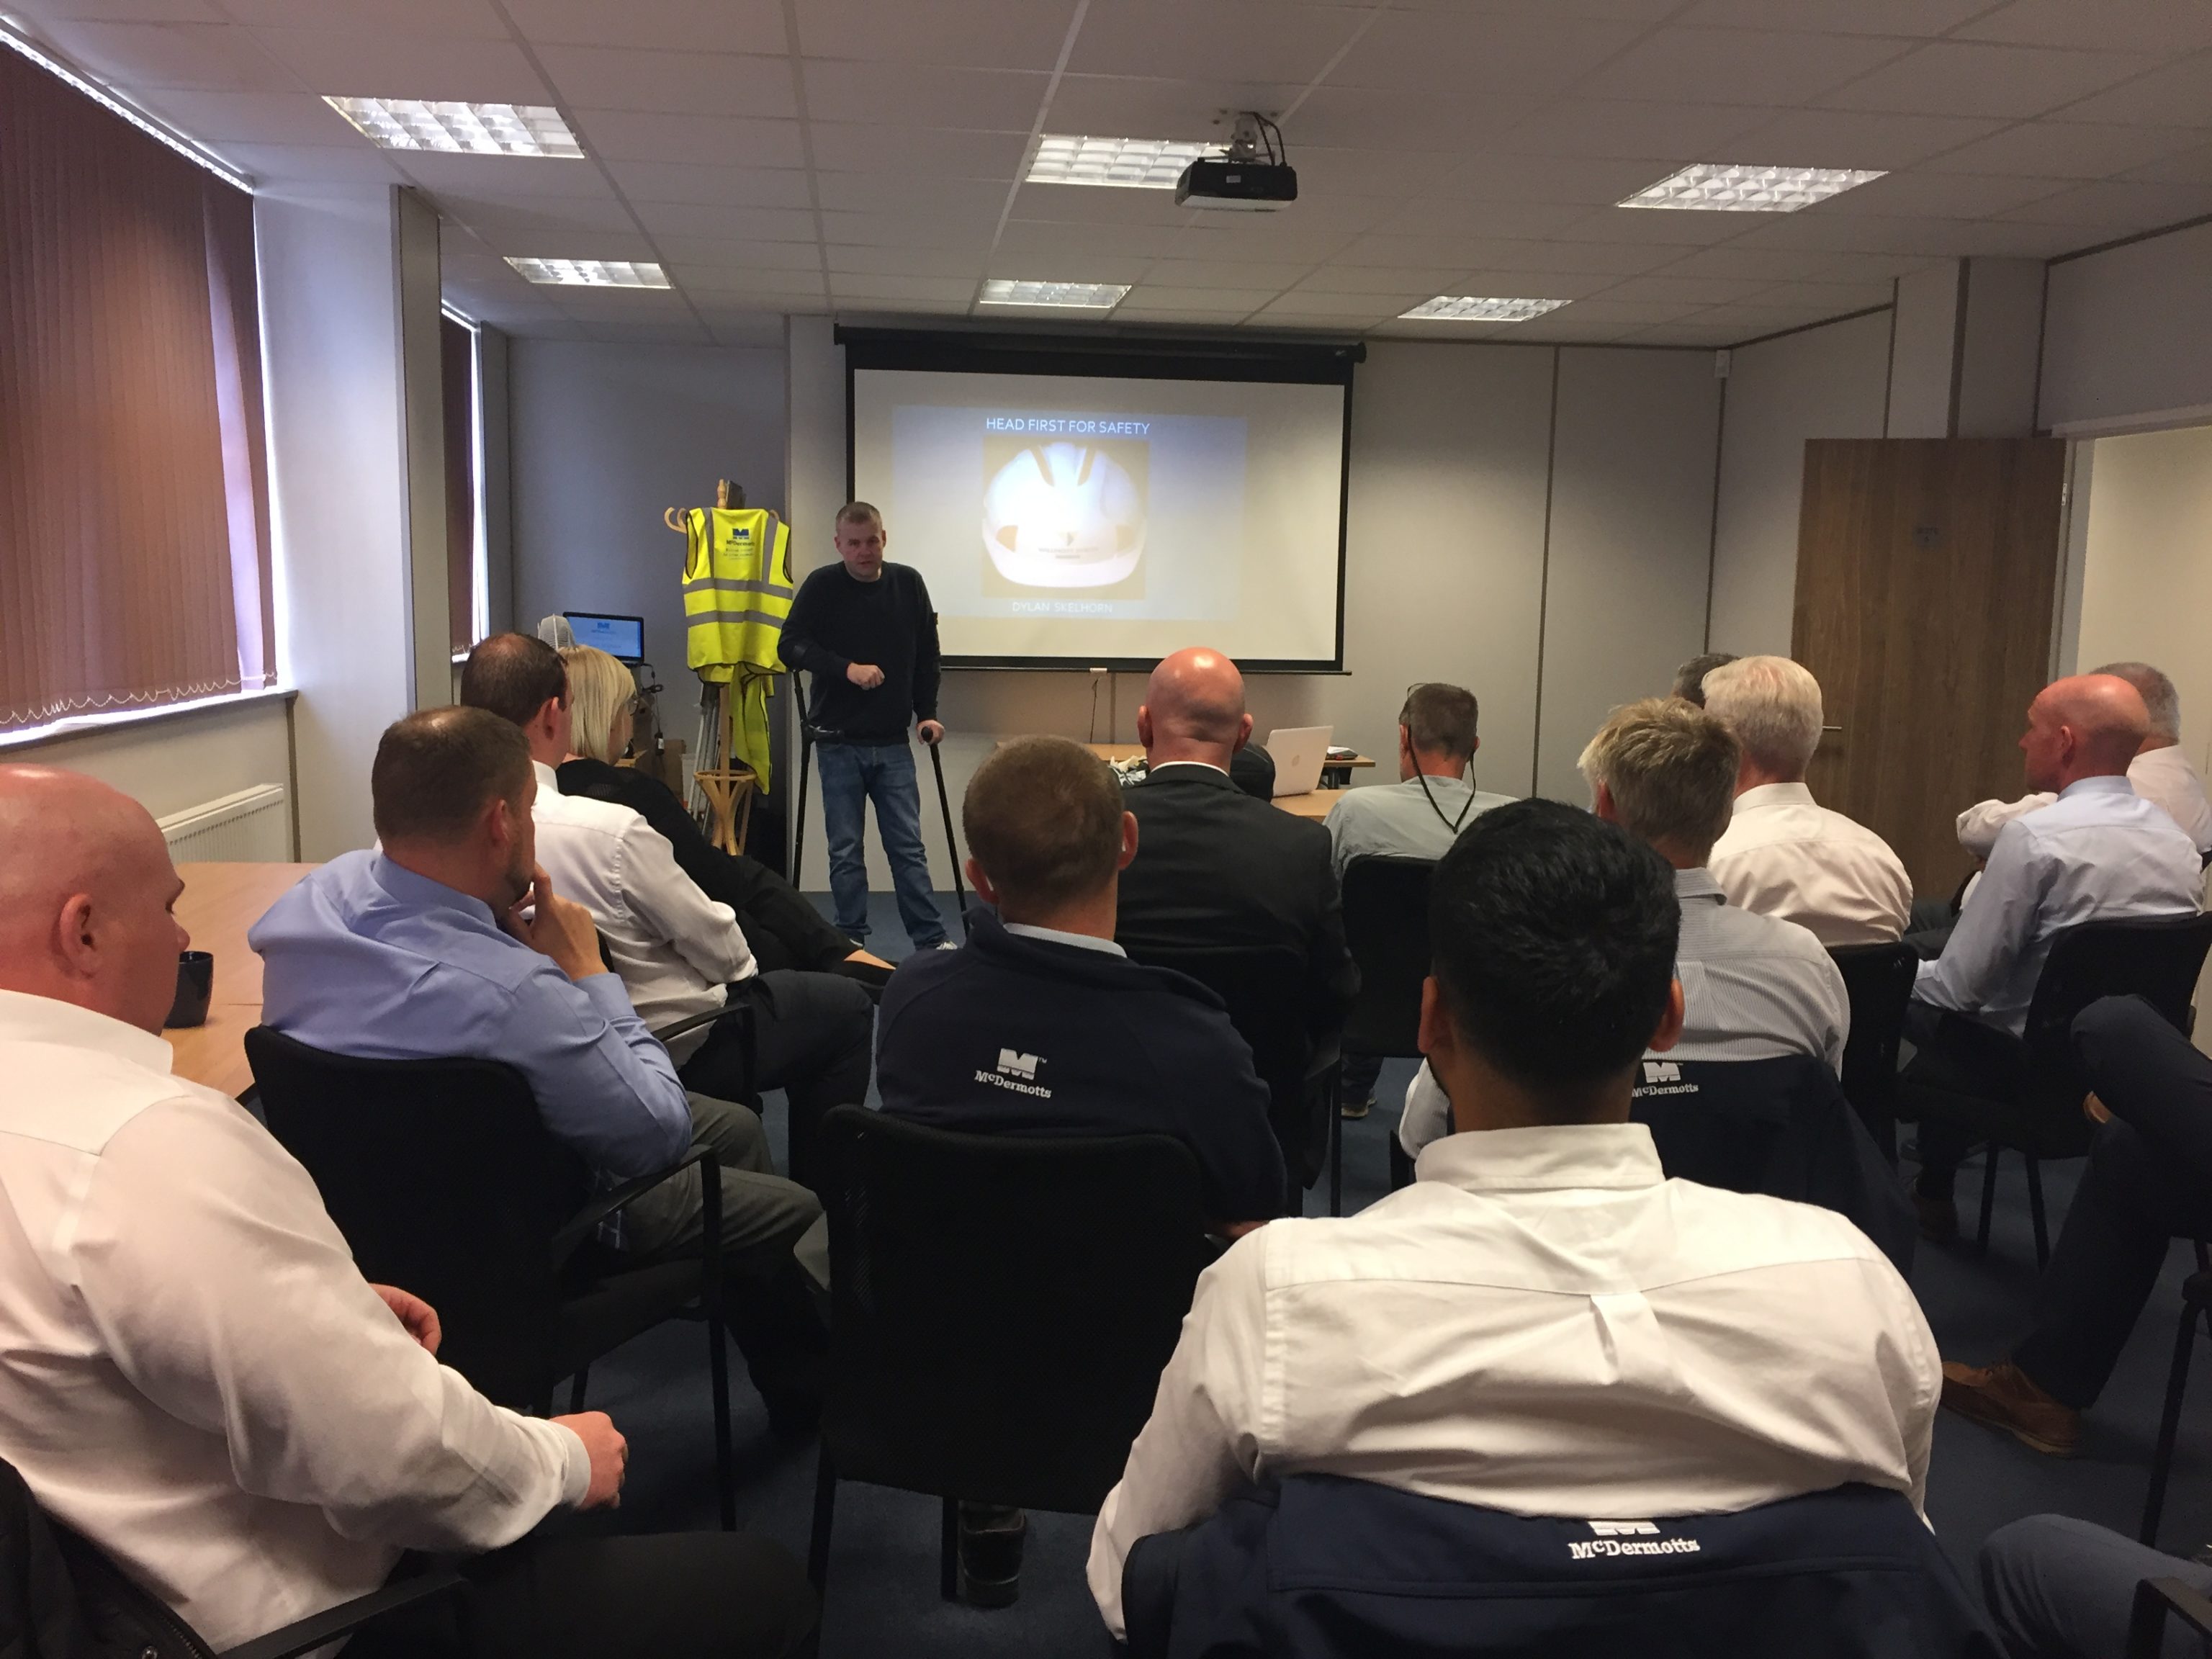 Last week Willmott Dixon's All Safe Ambassador, Dylan Skelhorn, came to our office to share his story about how one decision changed his life forever.